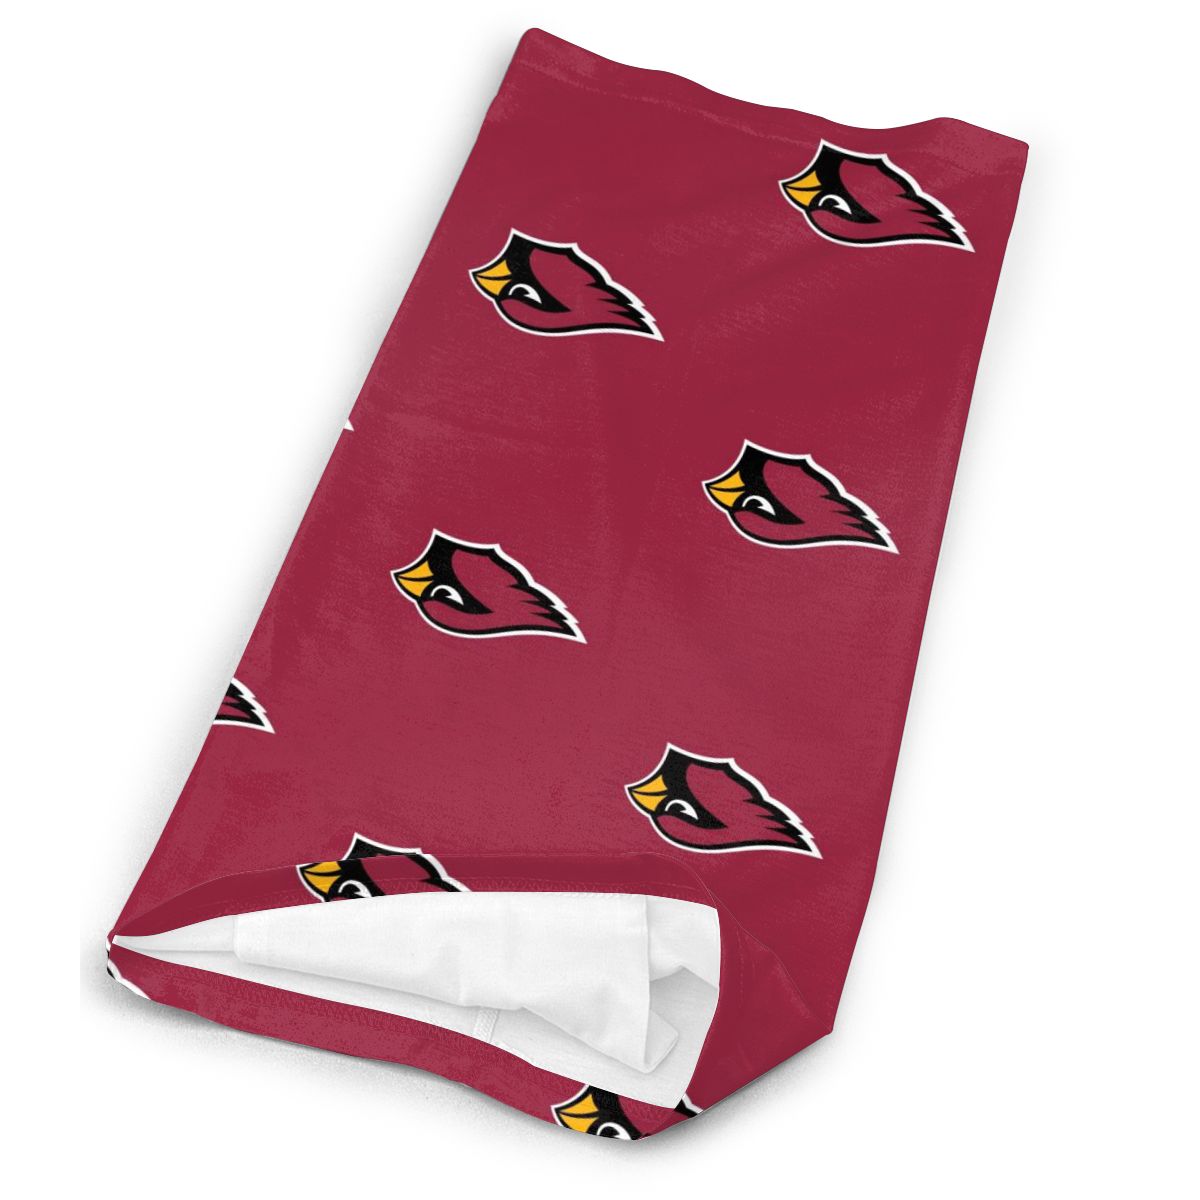 Reusble Mouth Cover Bandanas Arizona Cardinals Variety Head Scarf Face Mask With PM 2.5 Filter